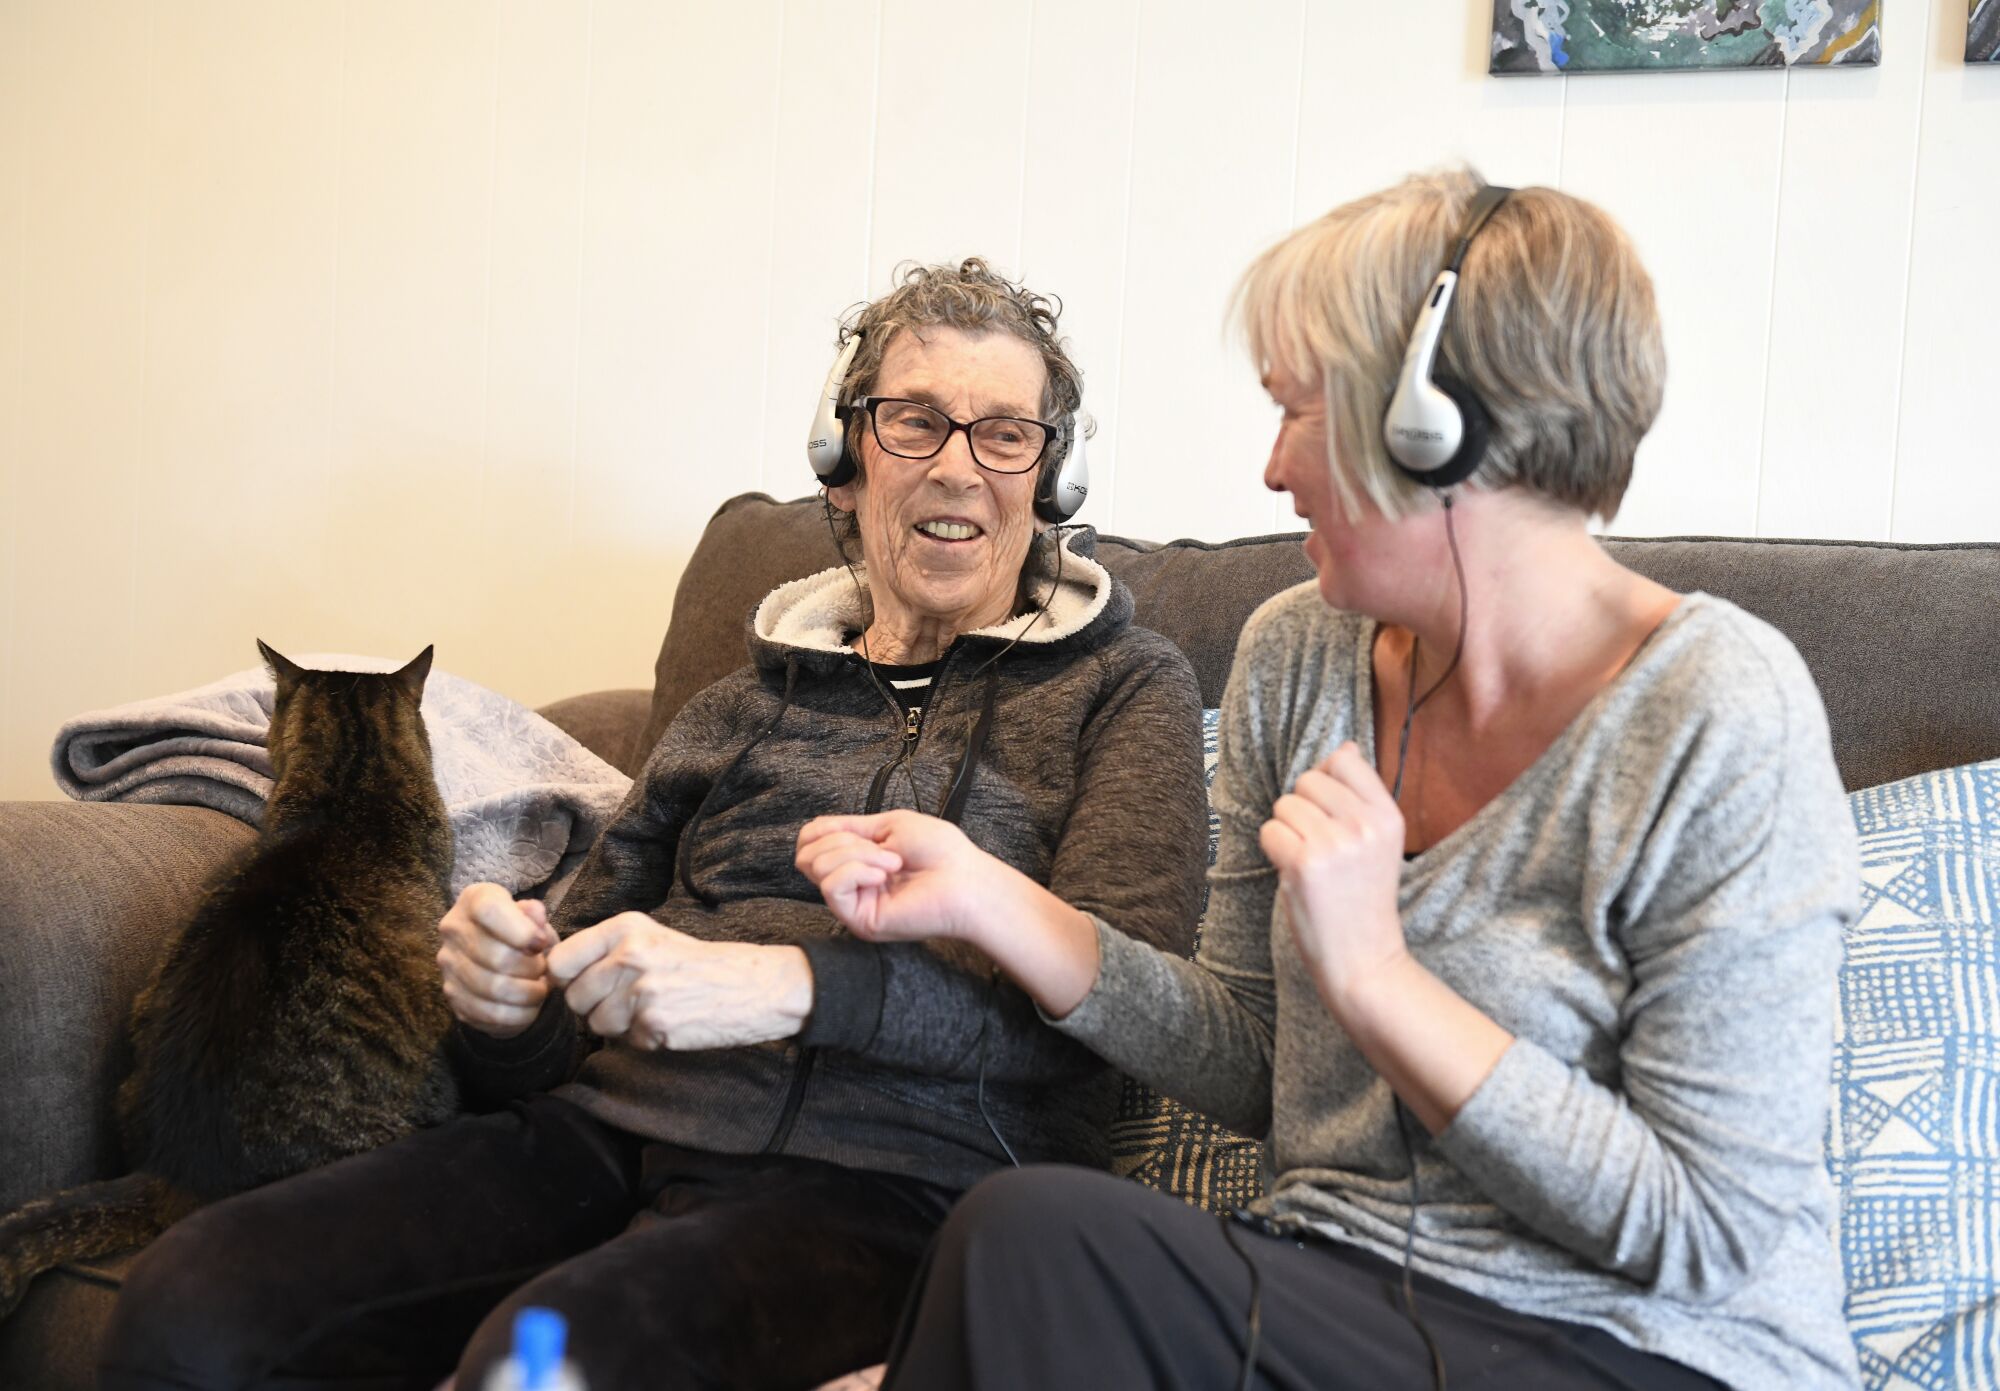 Stacey Skrocki, volunteer with Jewish Family Service, right and Gloria Wasserman move to the music as they do in-home music and memory therapy Monday, Dec. 9, 2019 in San Diego, California. (Photo by Denis Poroy/Union-Tribune)